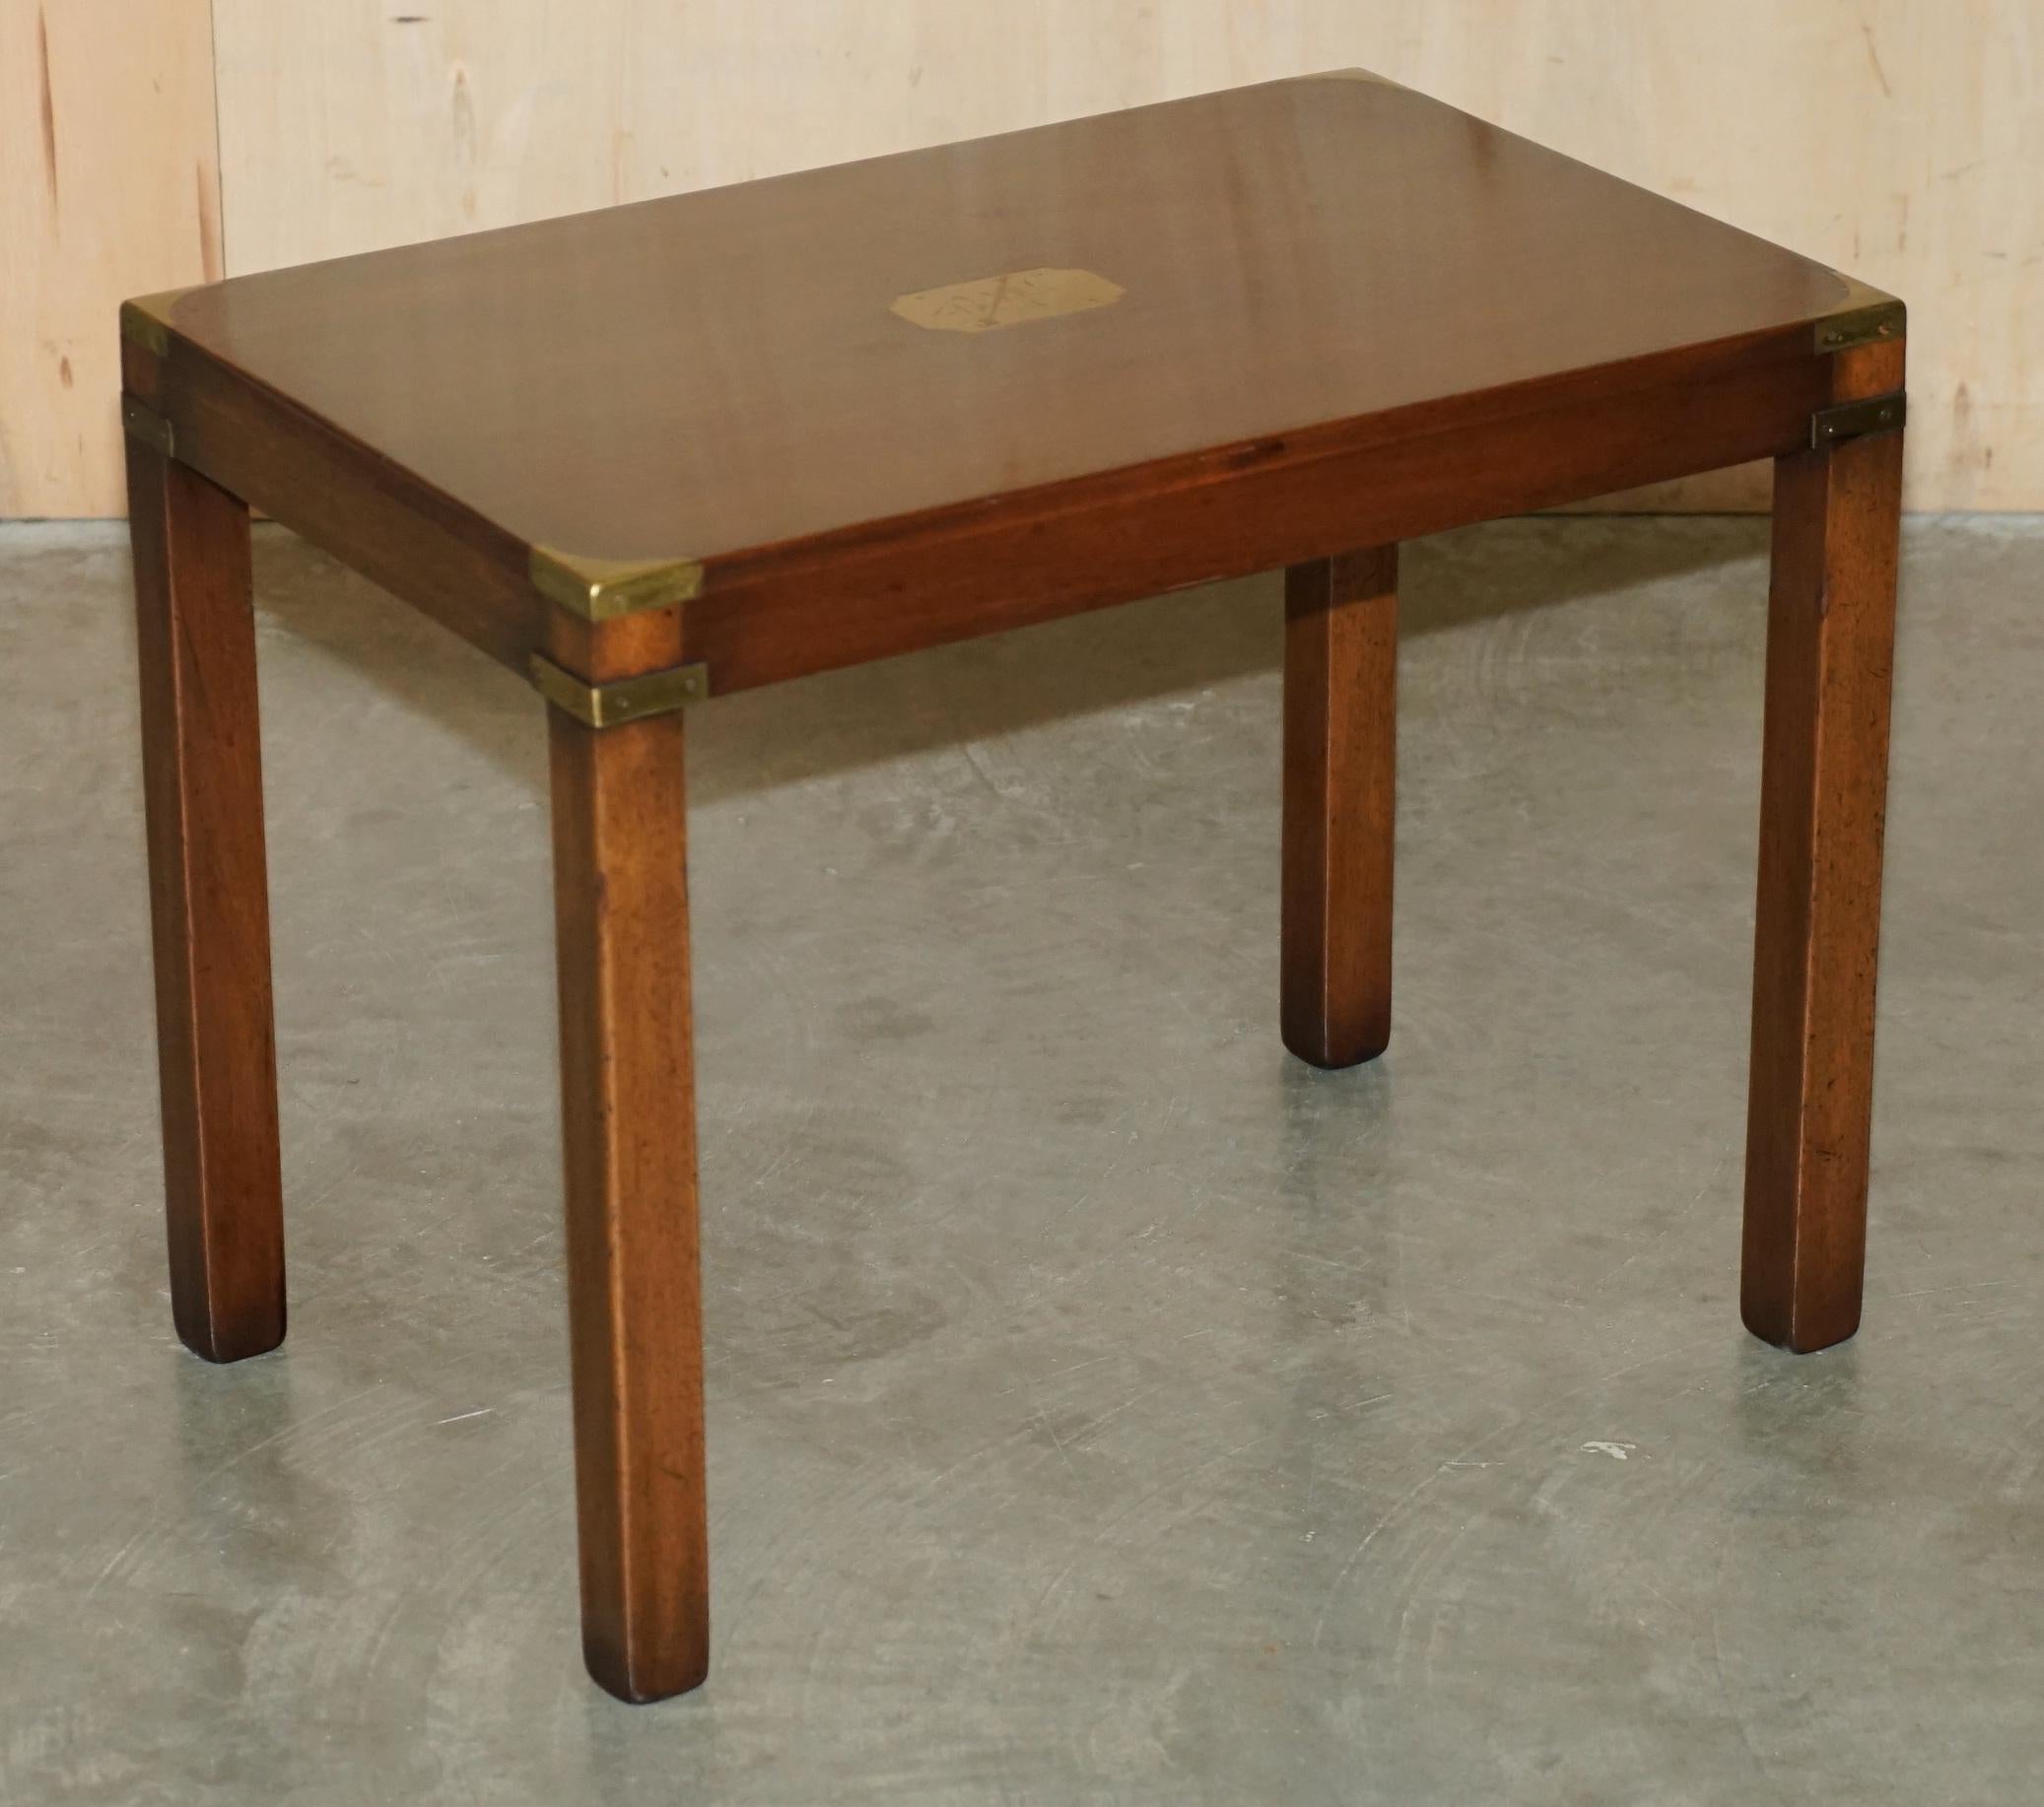 Hand-Crafted RESTORED HARRODS KENNEDY COFFEE & SiDE TABLE NEST OF TABLES MILITARY CAMPAIGN For Sale